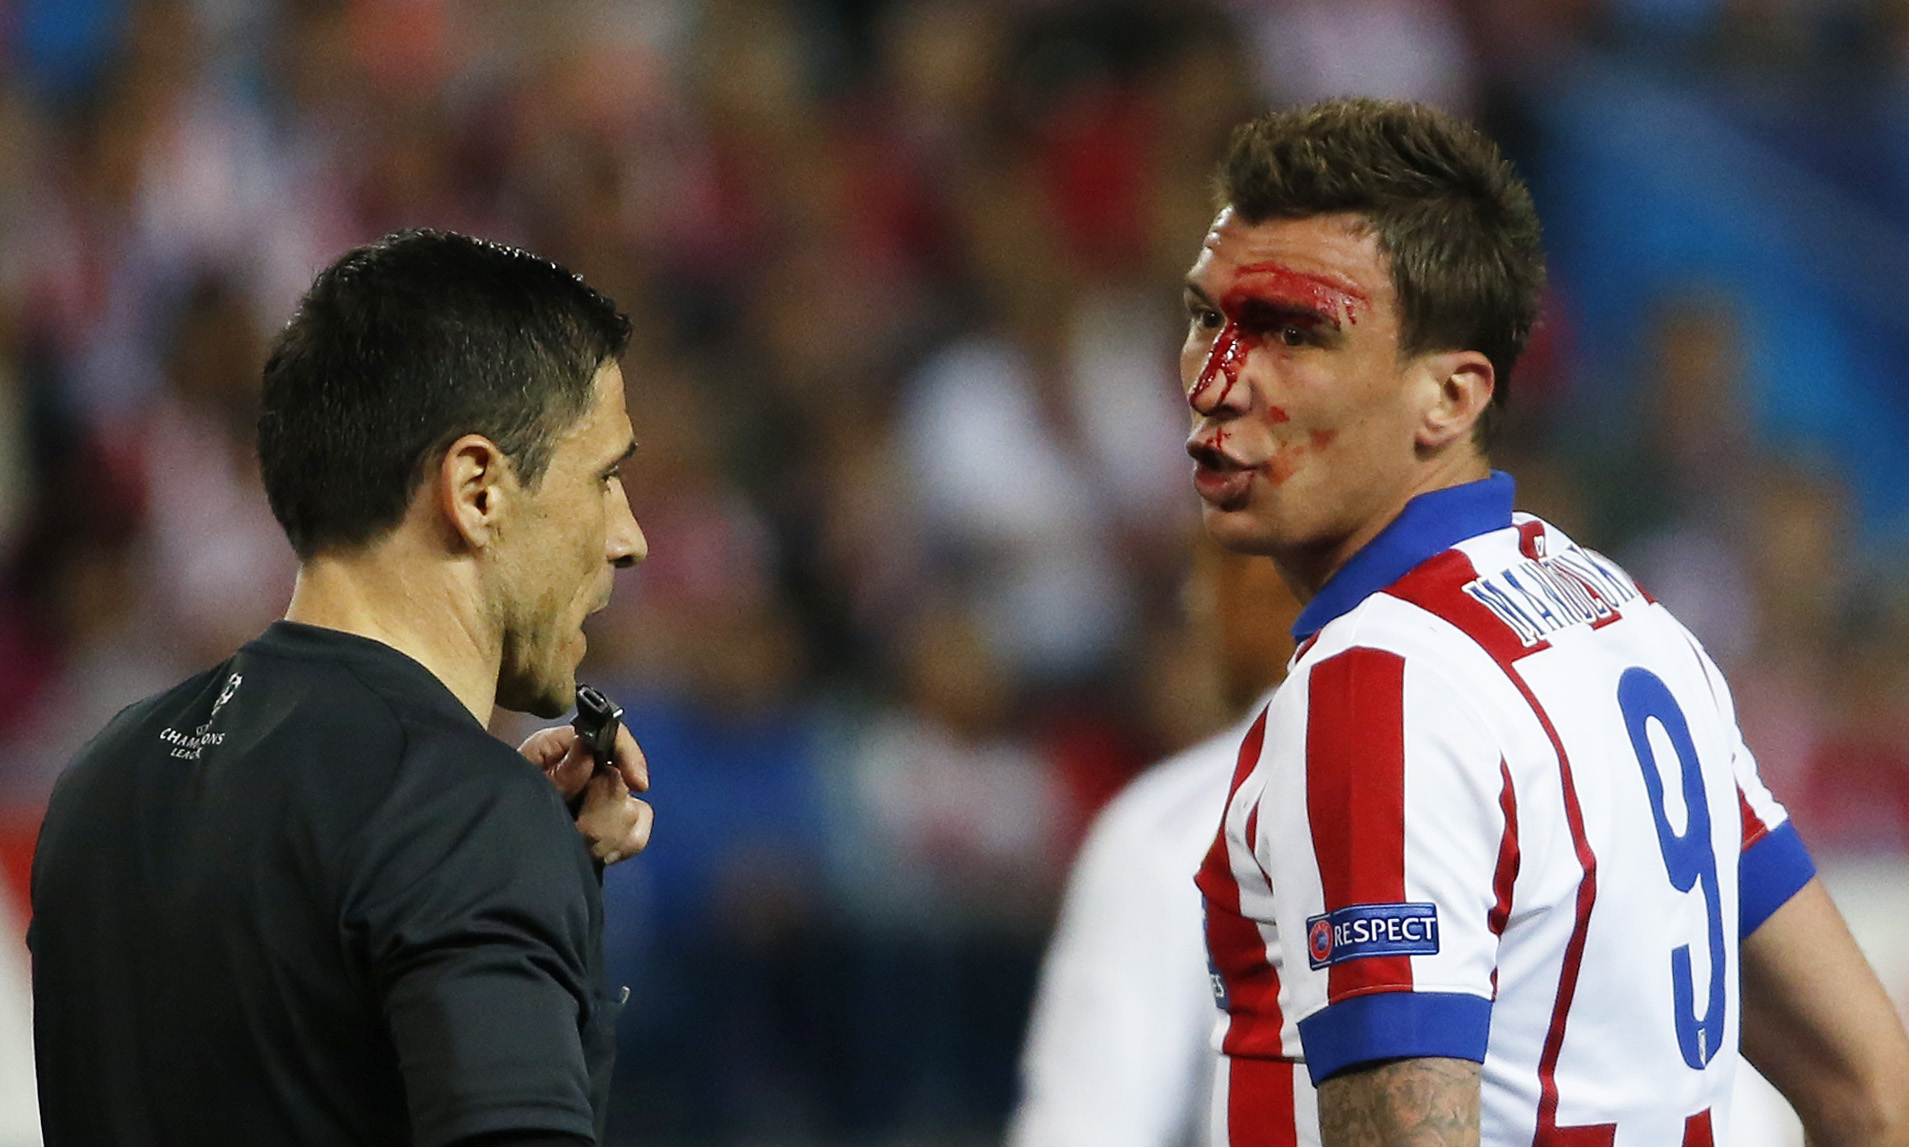 Atletico Madrid's Mario Mandzukic remonstrates with referee Milorad Mazic as he walks off the pitch to receive treatment after sustaining a head injury. Photo: Reuters